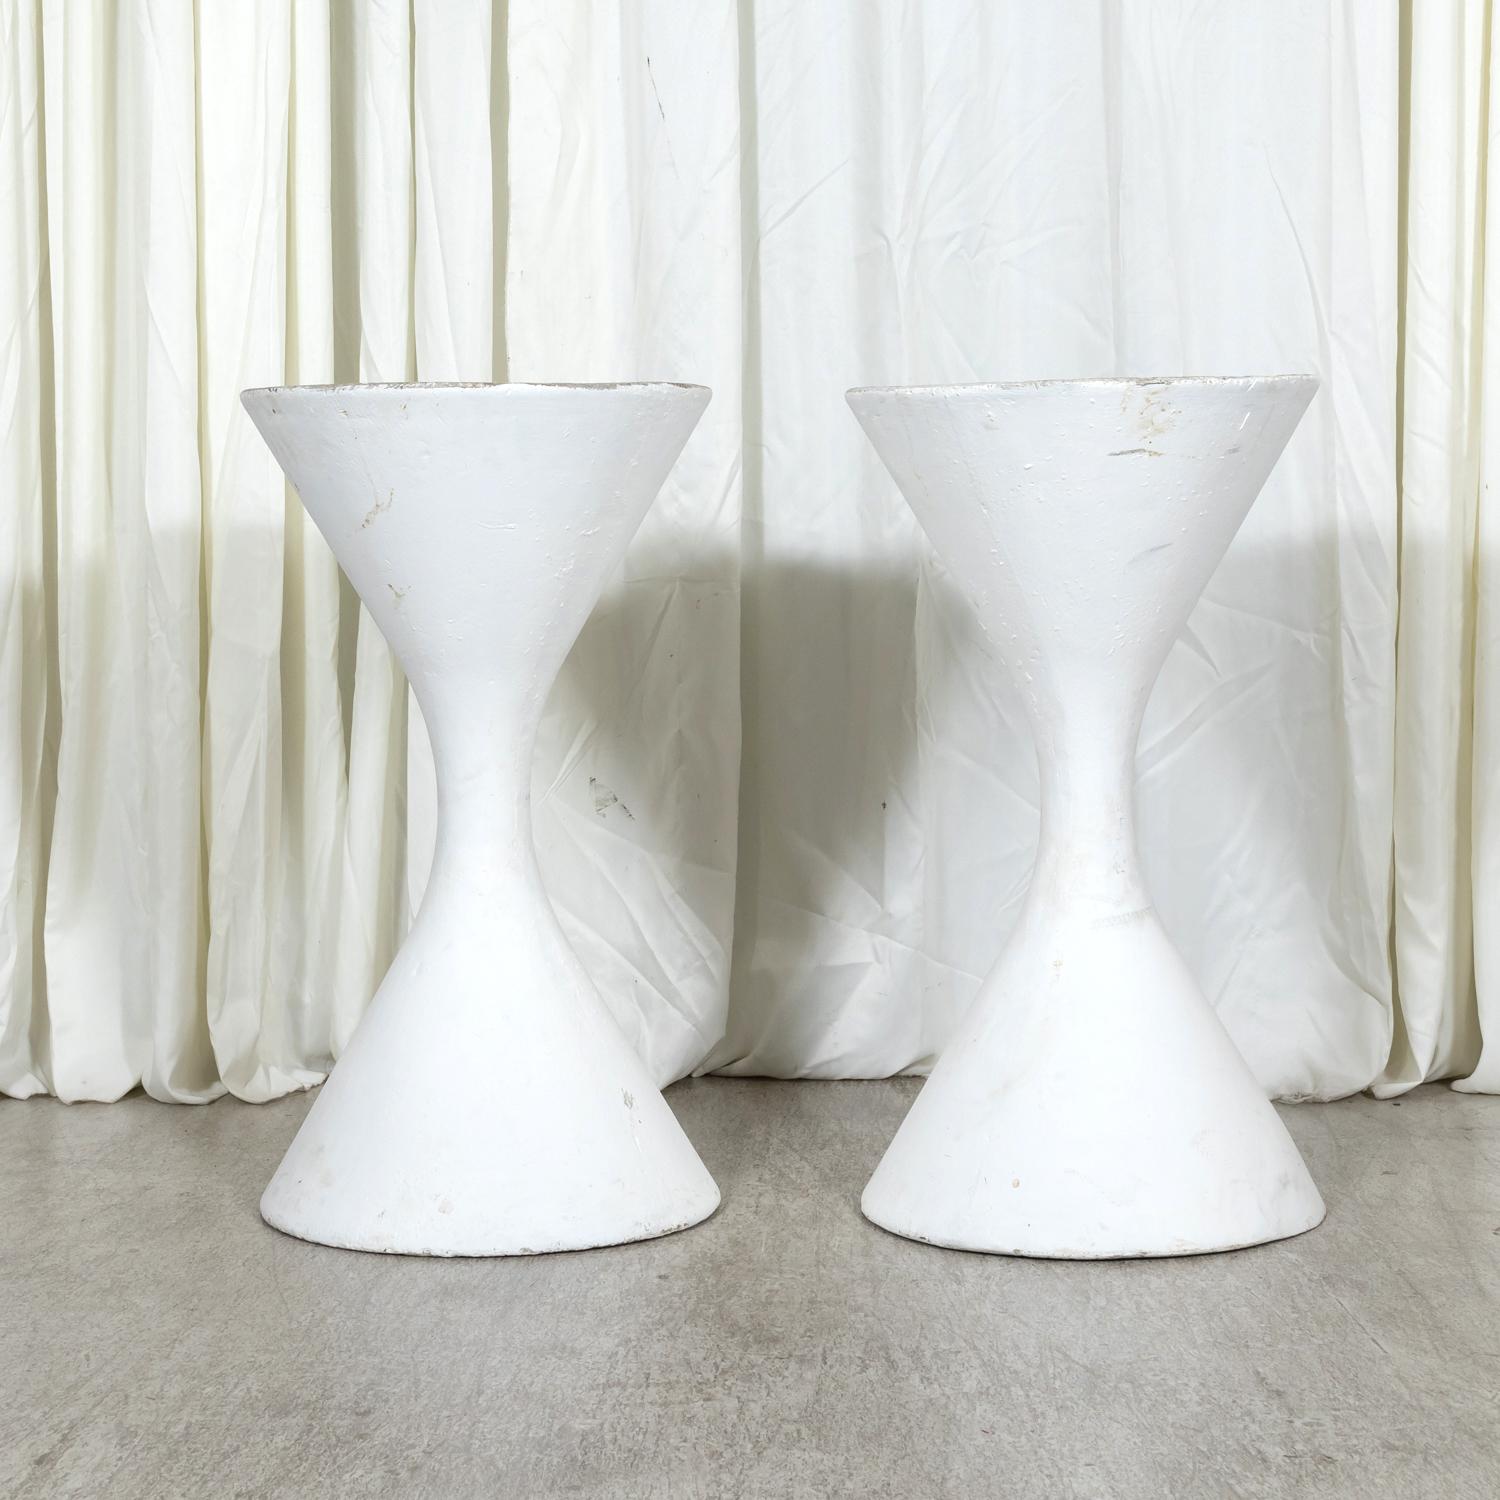 Swiss  Pair of Mid-Century Modern Willy Guhl X-Large Hourglass Diablo Planters For Sale